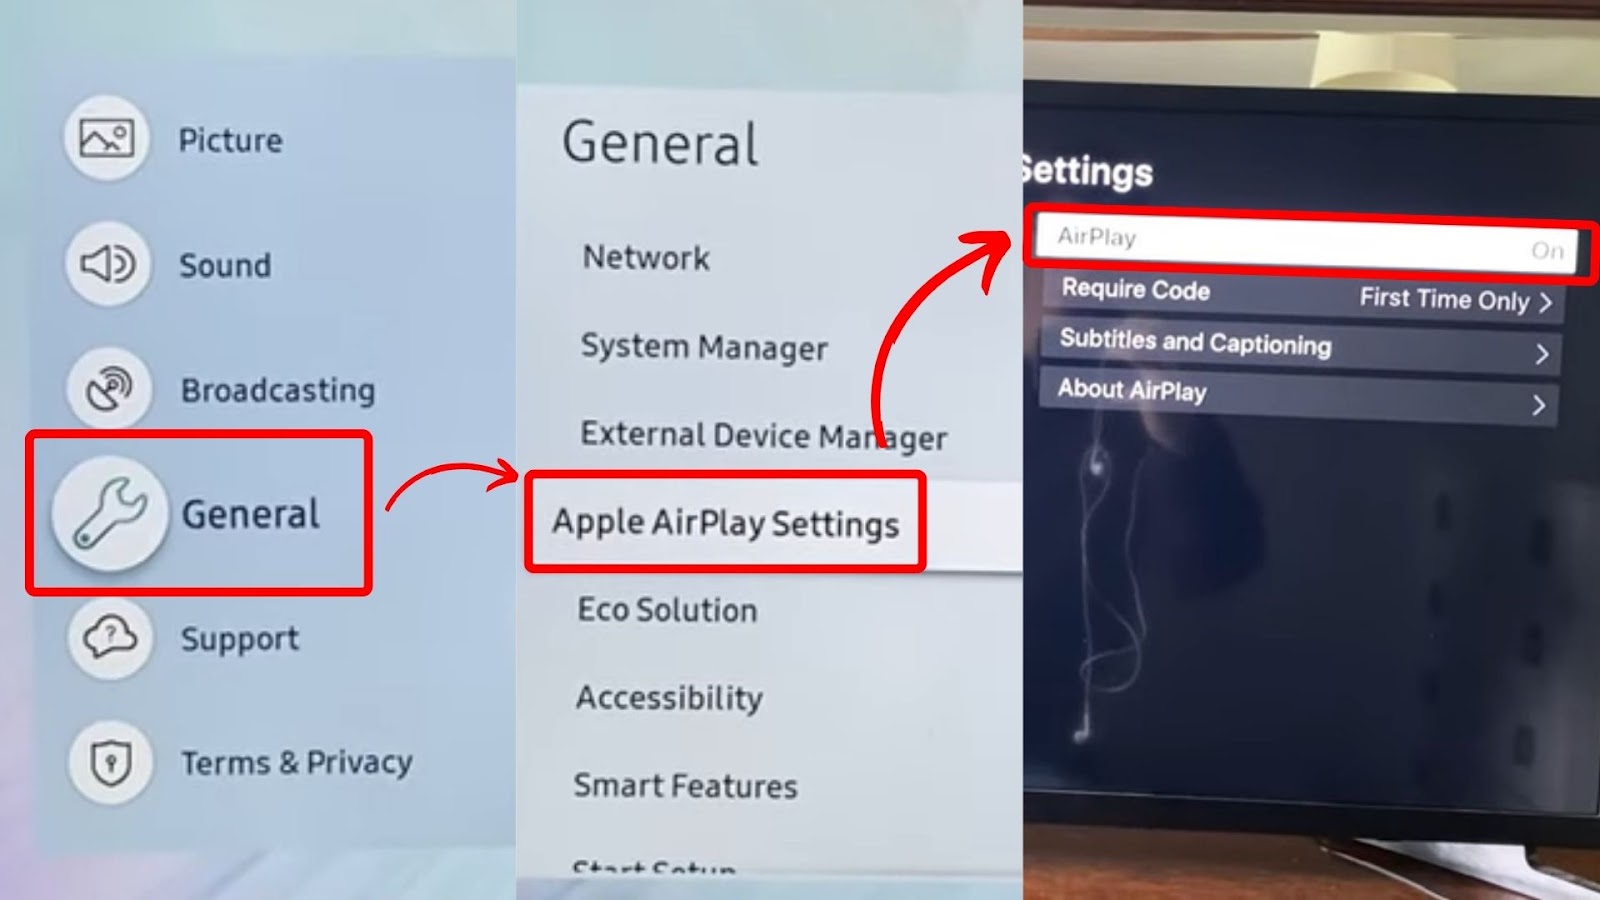 How to Turn Airplay on to Mirror an iPhone to Samsung TV